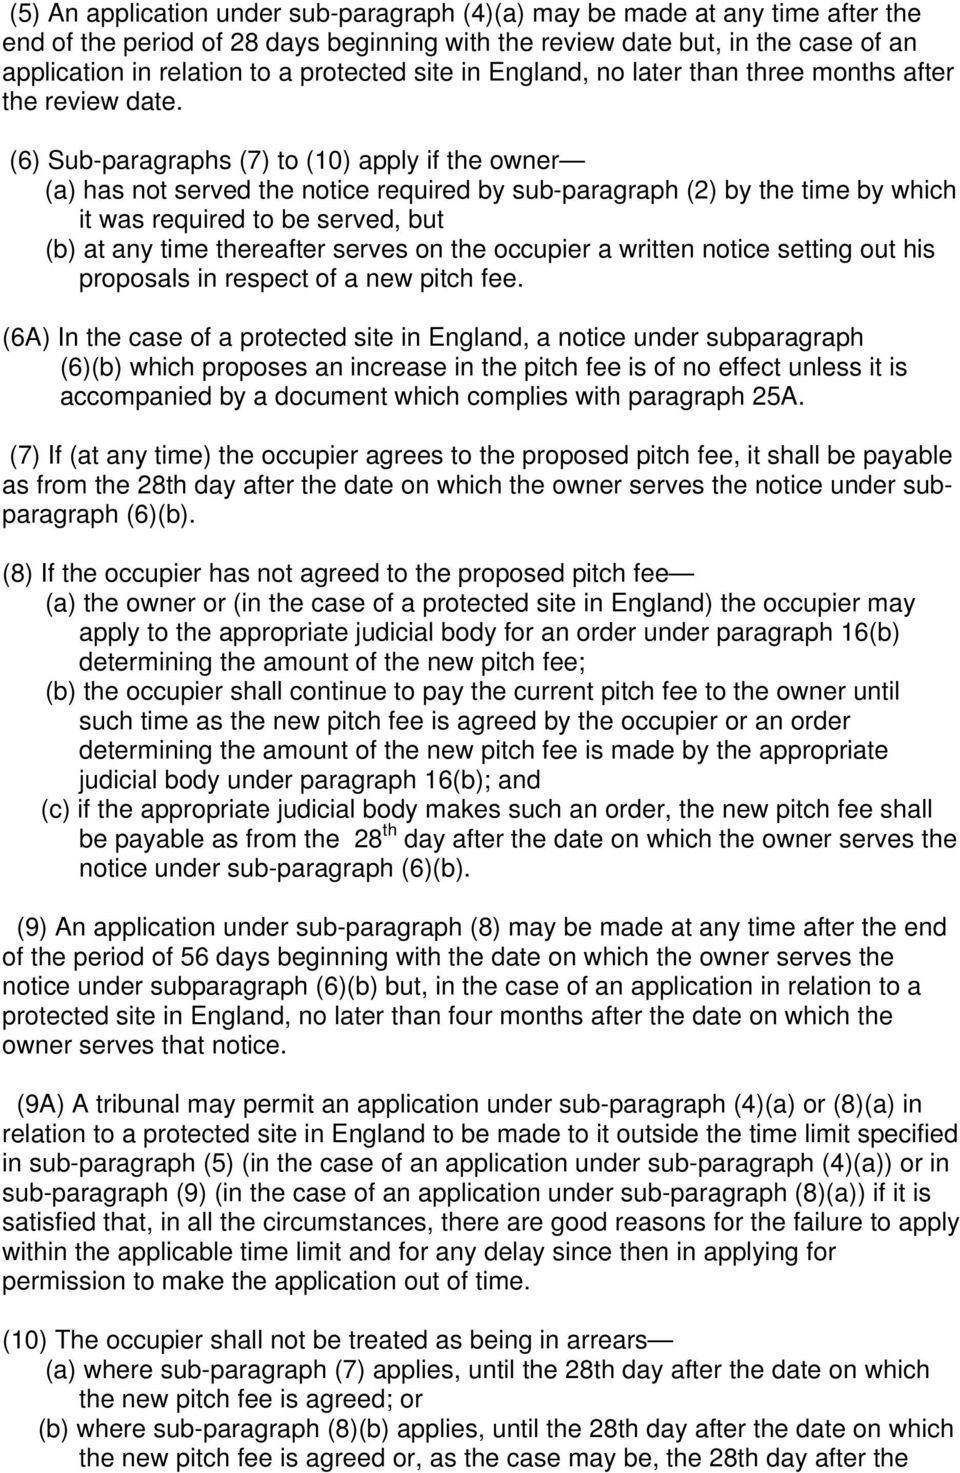 (6) Sub-paragraphs (7) to (10) apply if the owner (a) has not served the notice required by sub-paragraph (2) by the time by which it was required to be served, but (b) at any time thereafter serves